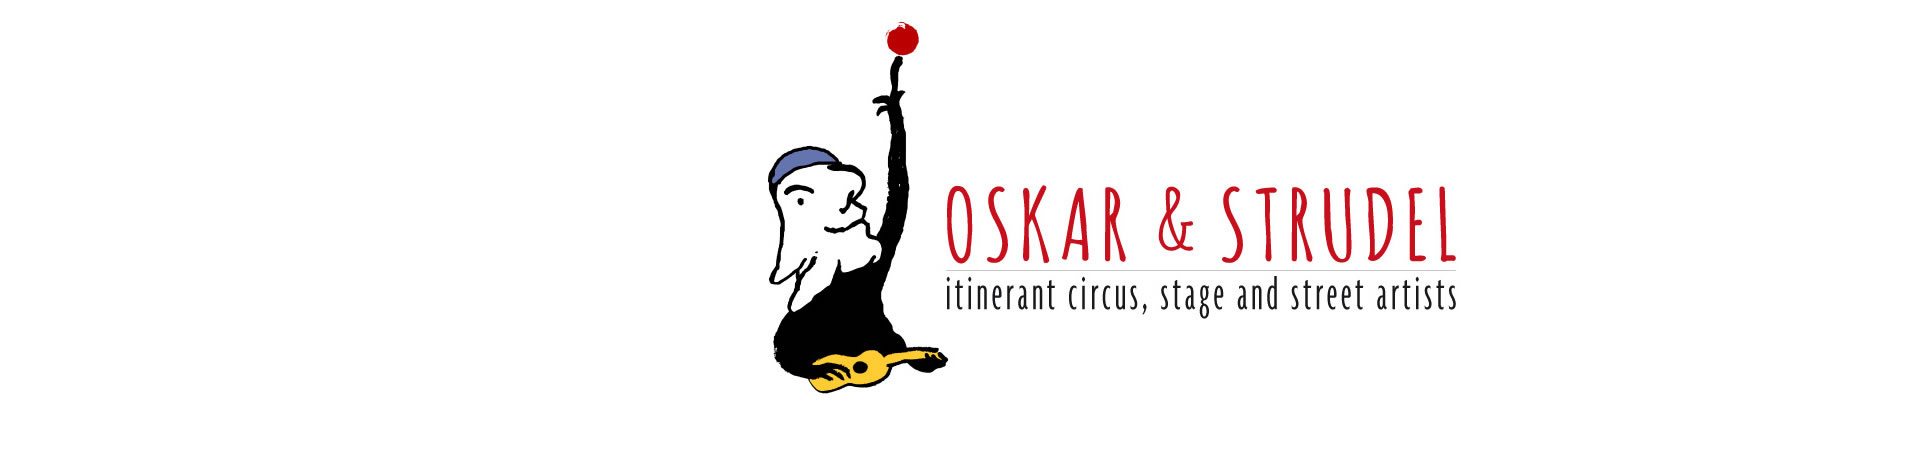 Oskar &  Strudel, Itinerant circus, stage and street artists